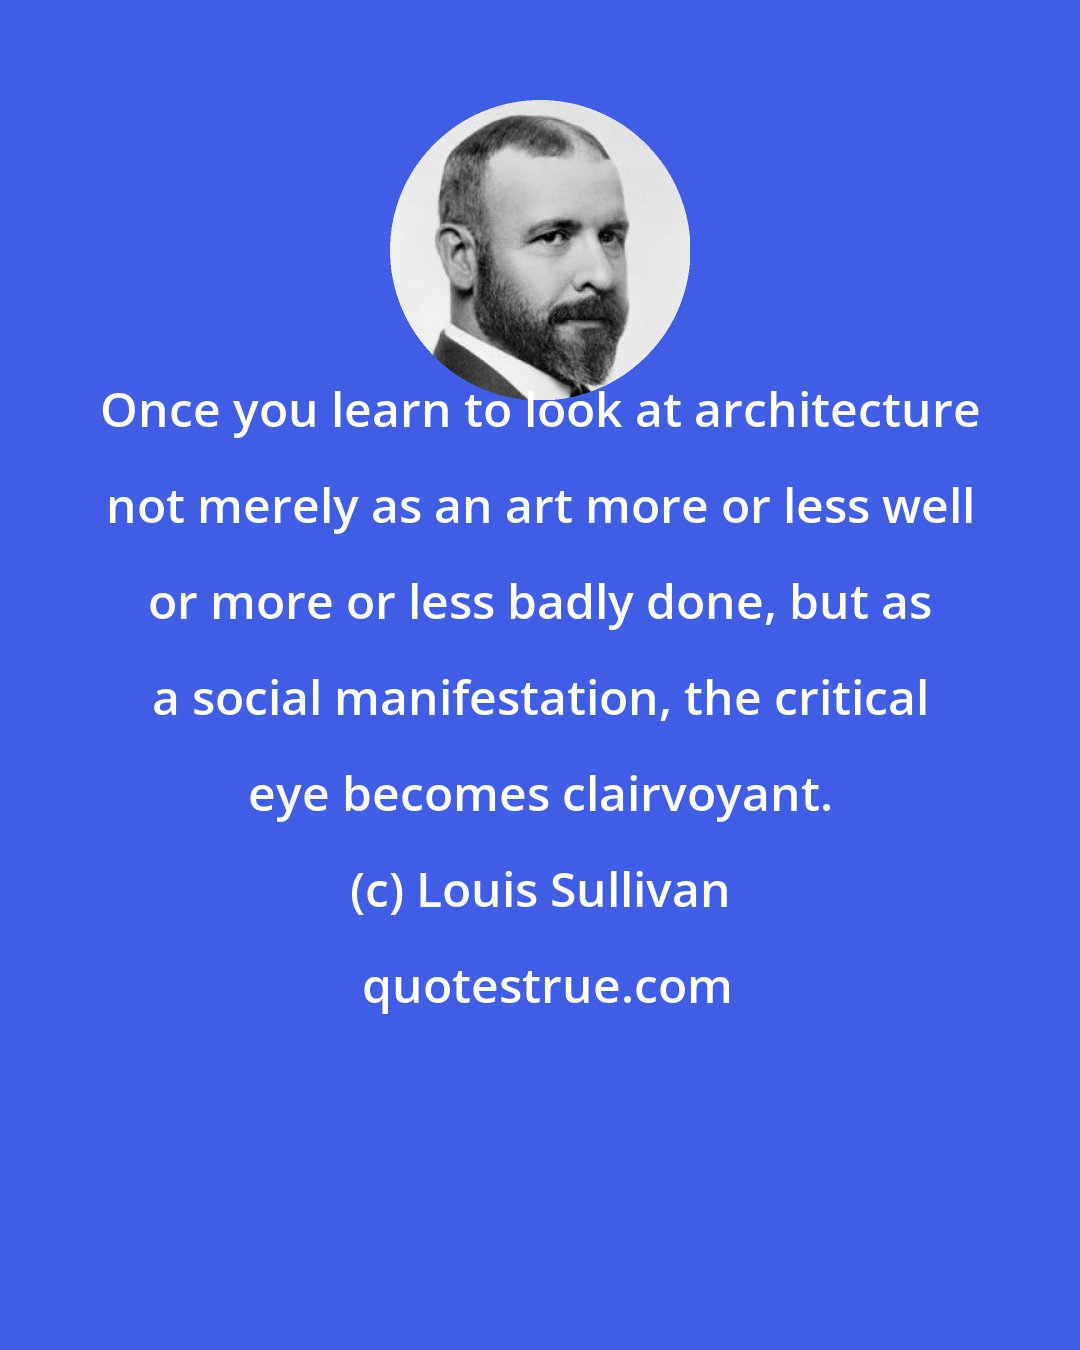 Louis Sullivan: Once you learn to look at architecture not merely as an art more or less well or more or less badly done, but as a social manifestation, the critical eye becomes clairvoyant.